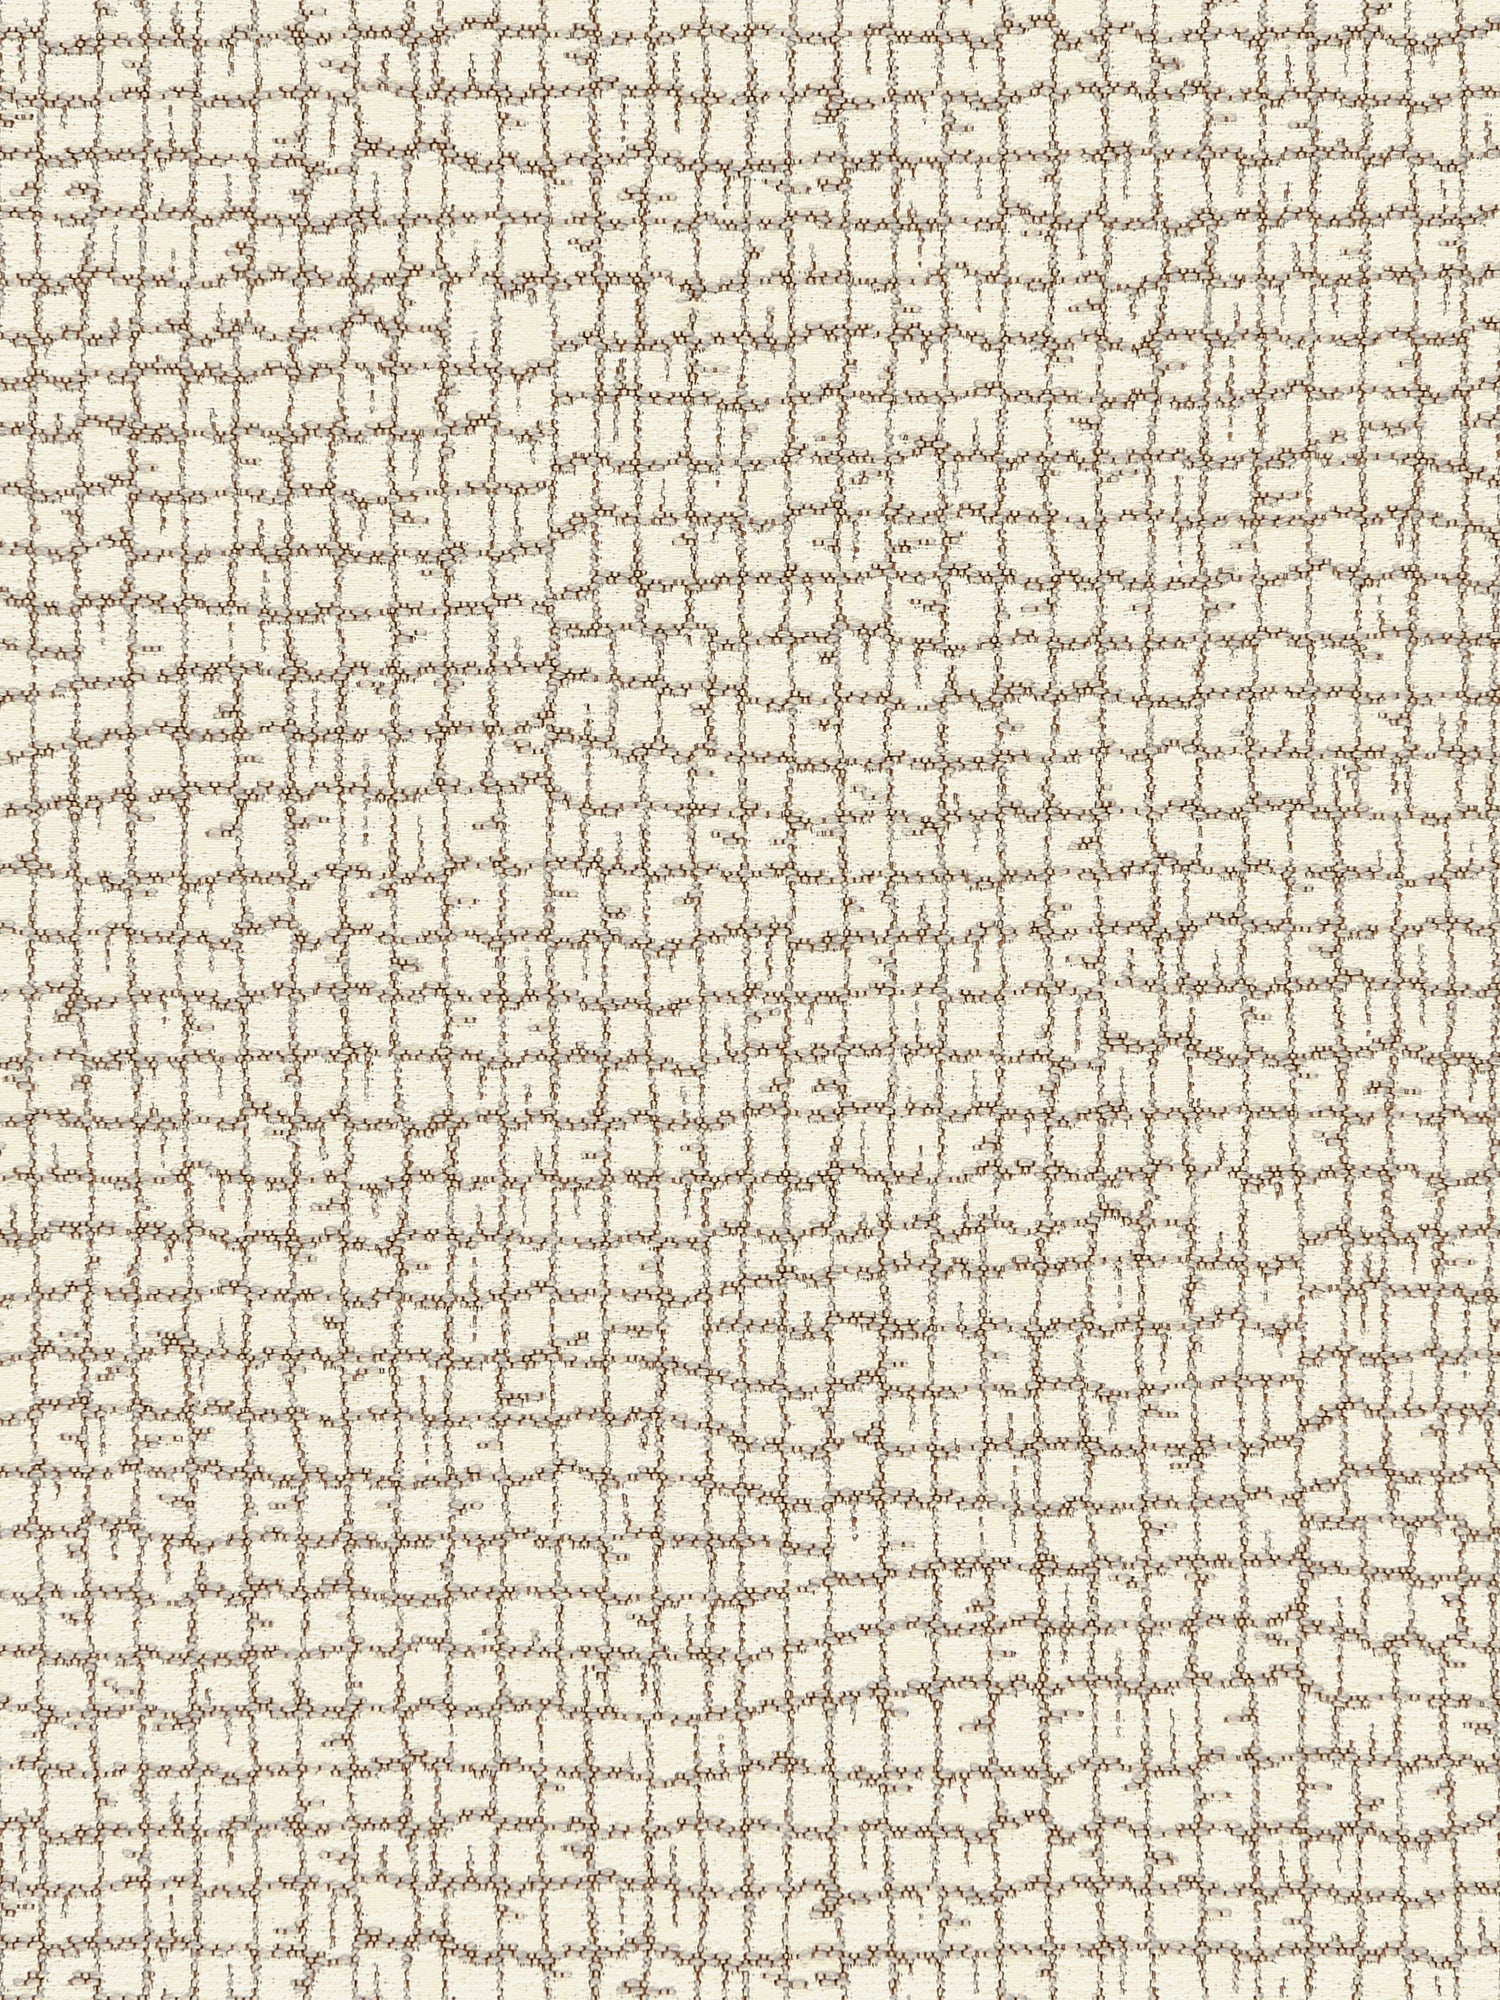 Troya Beach fabric in greige color - pattern number PO 0002TROY - by Scalamandre in the Old World Weavers collection